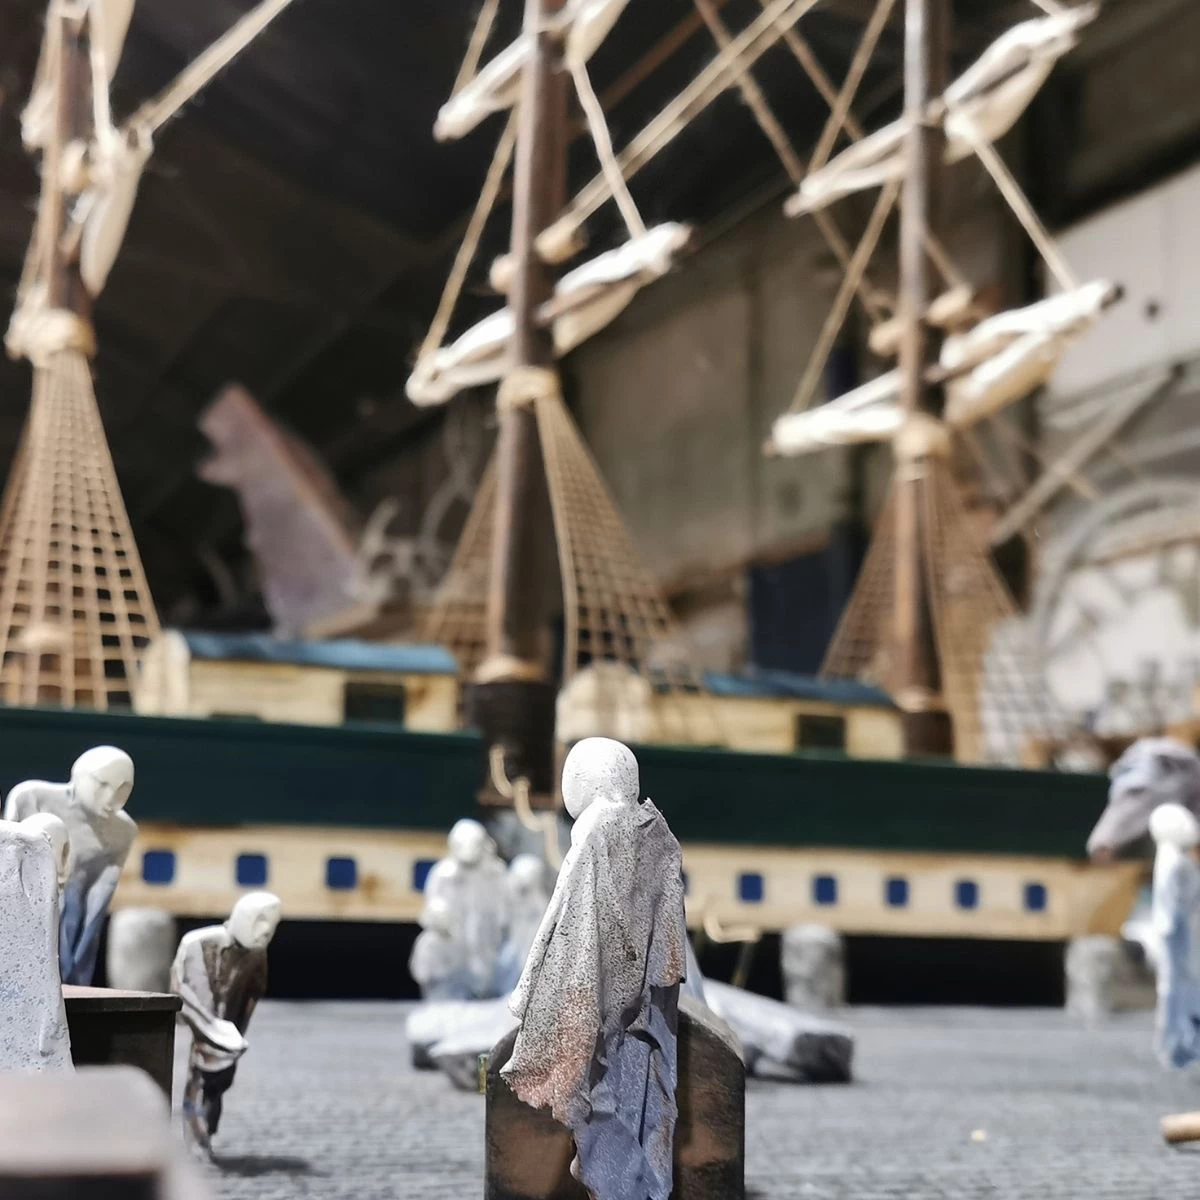 Miniature model of a famine ship and figures.